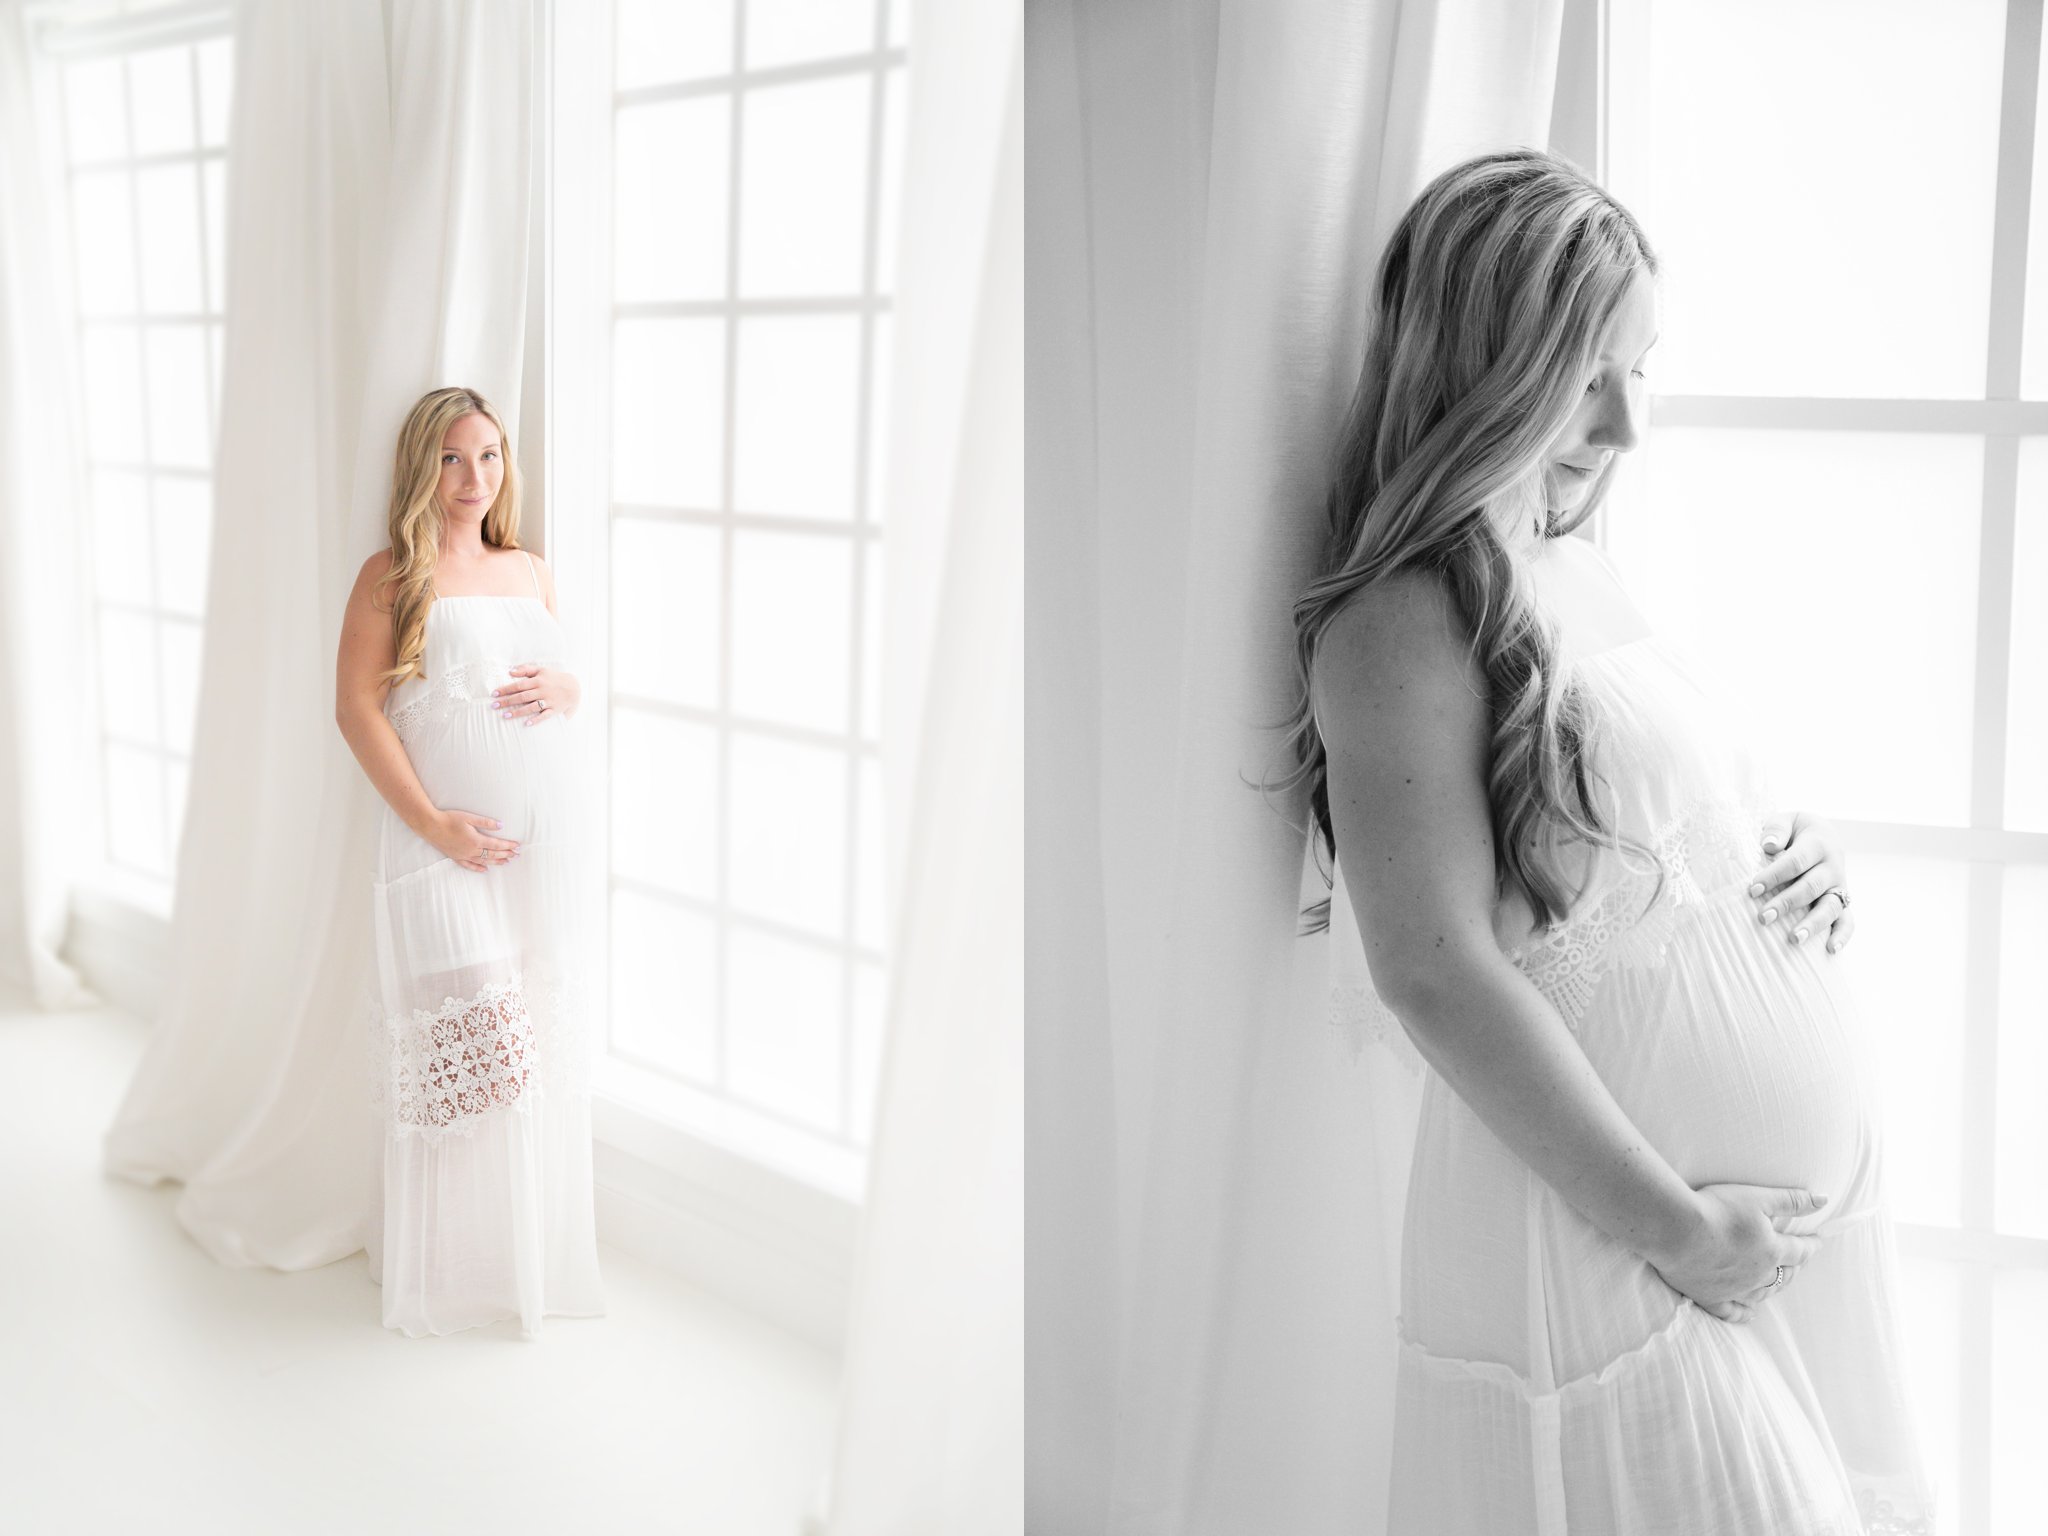 Pregnant woman standing by large window being photographed during maternity session